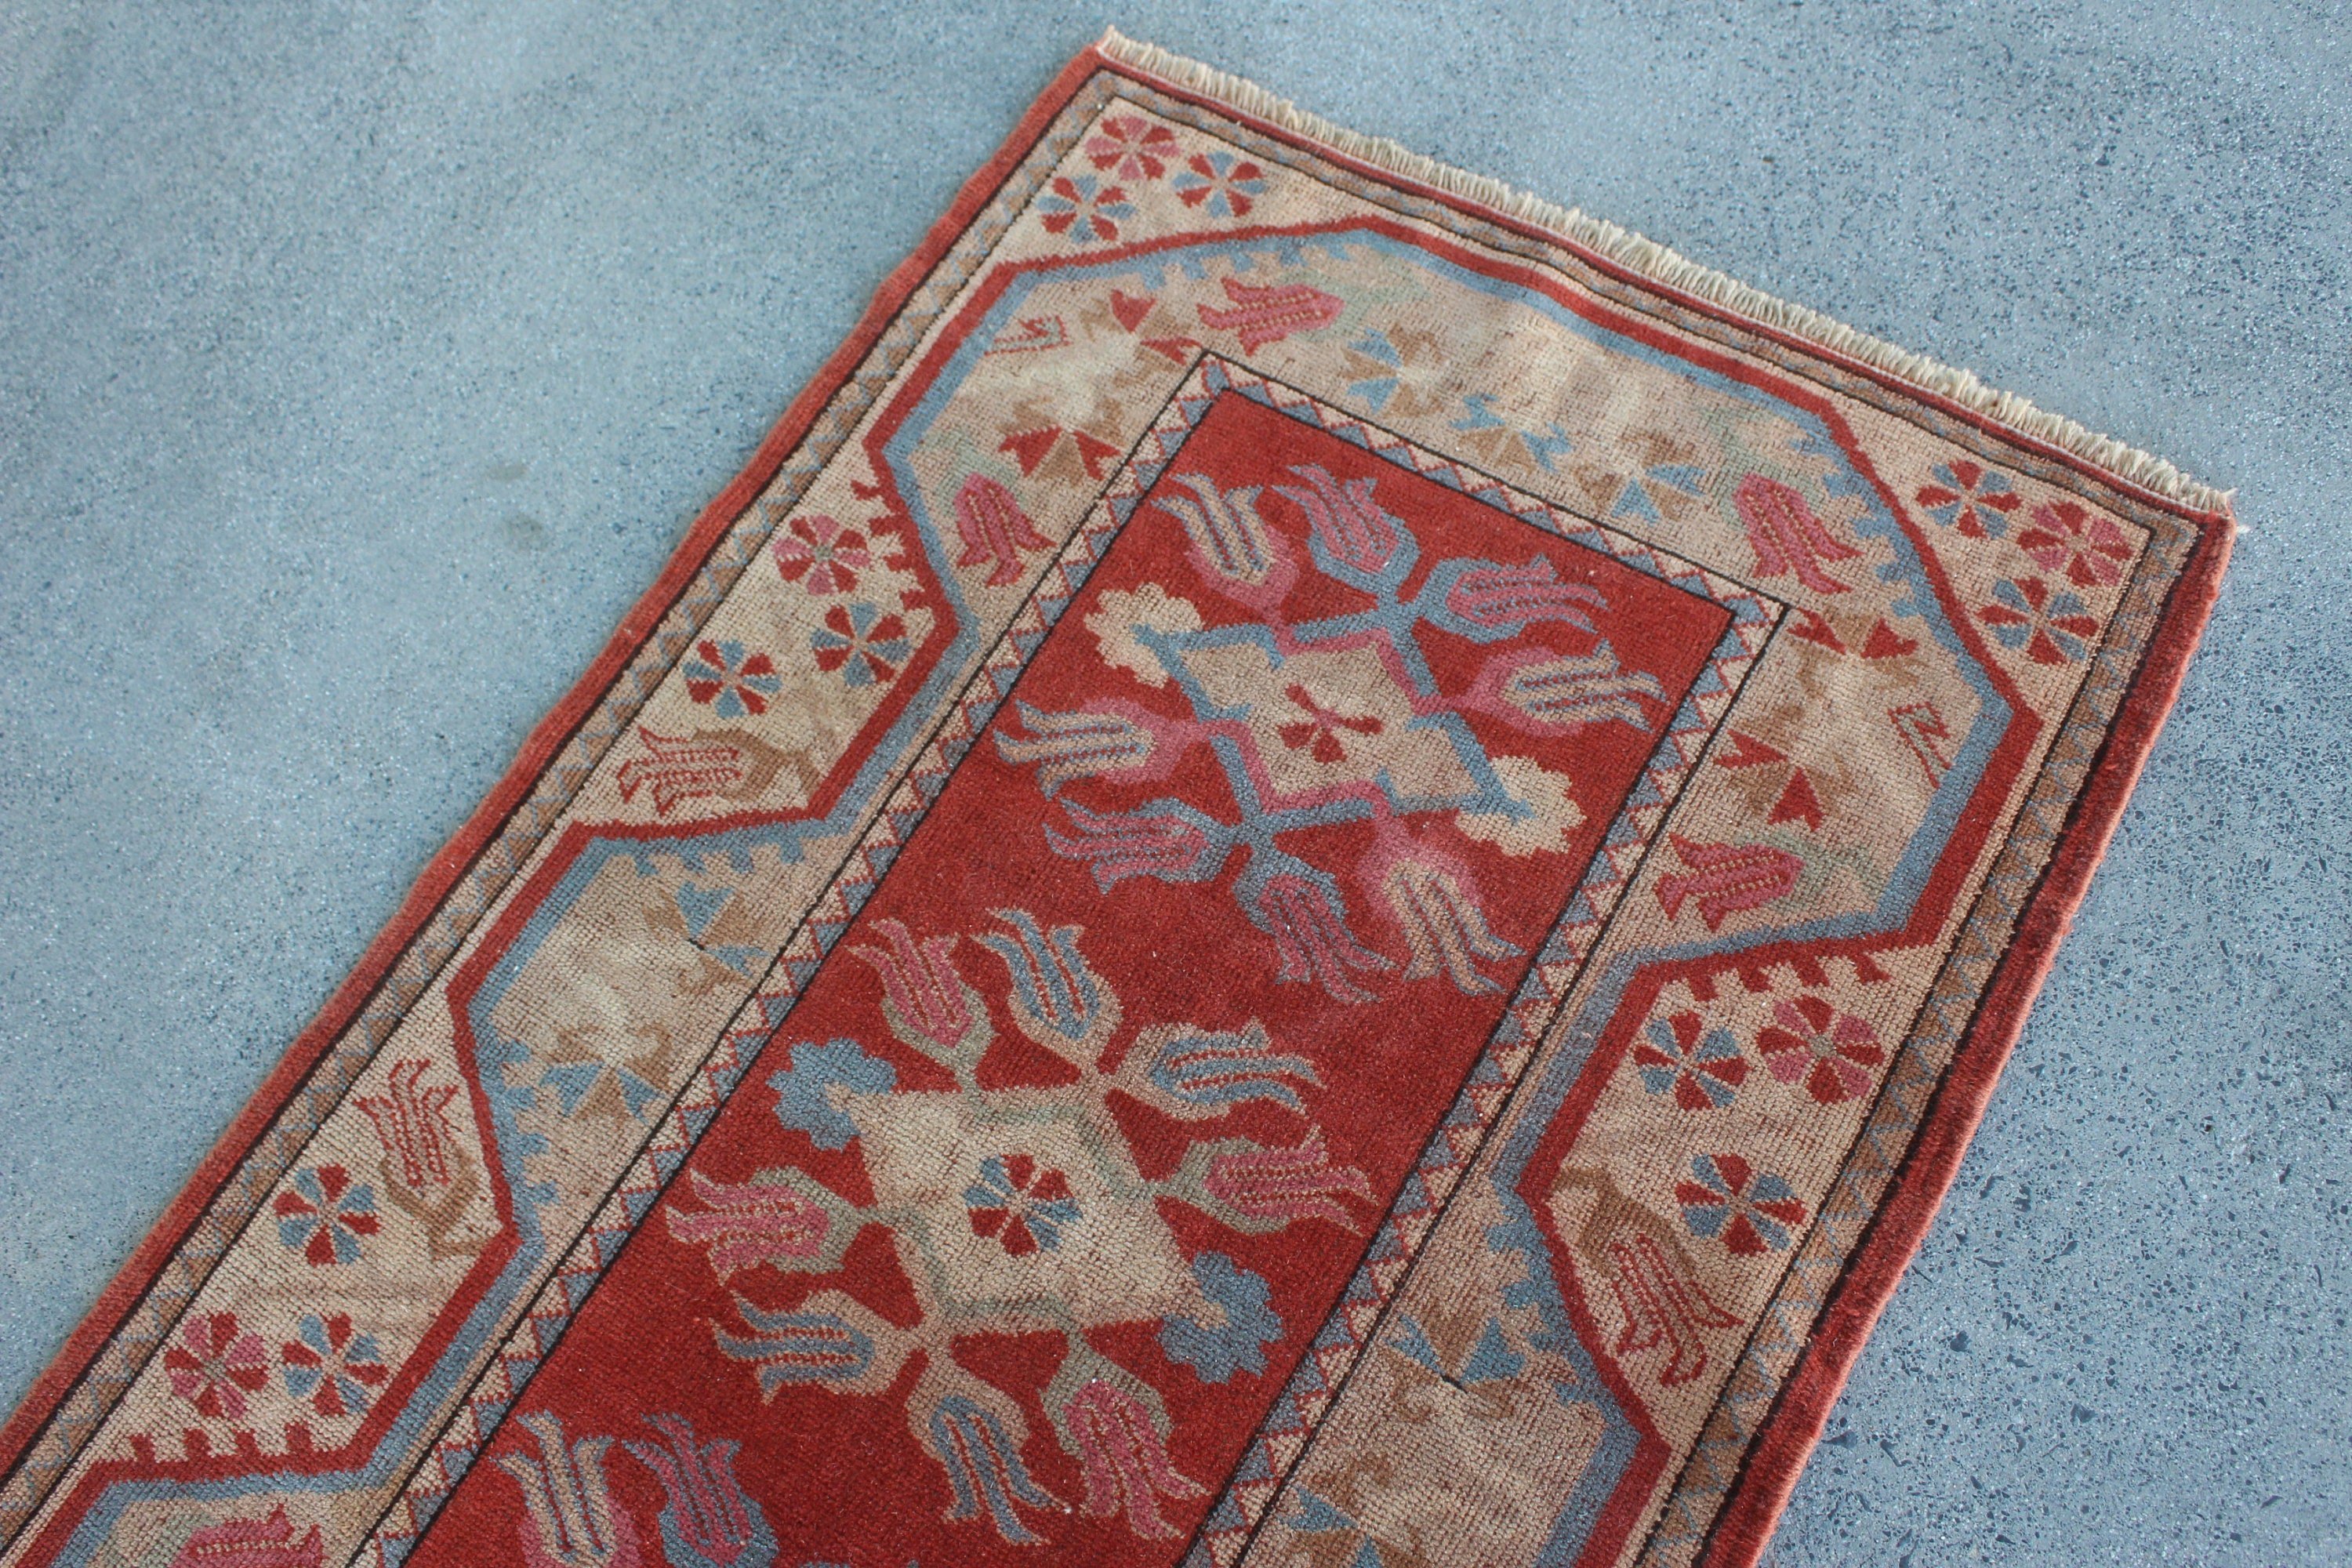 Bedroom Rugs, Kitchen Rug, Red Home Decor Rugs, Rugs for Bath, Antique Rug, Vintage Rugs, Wool Rugs, 2.5x4.4 ft Small Rug, Turkish Rugs